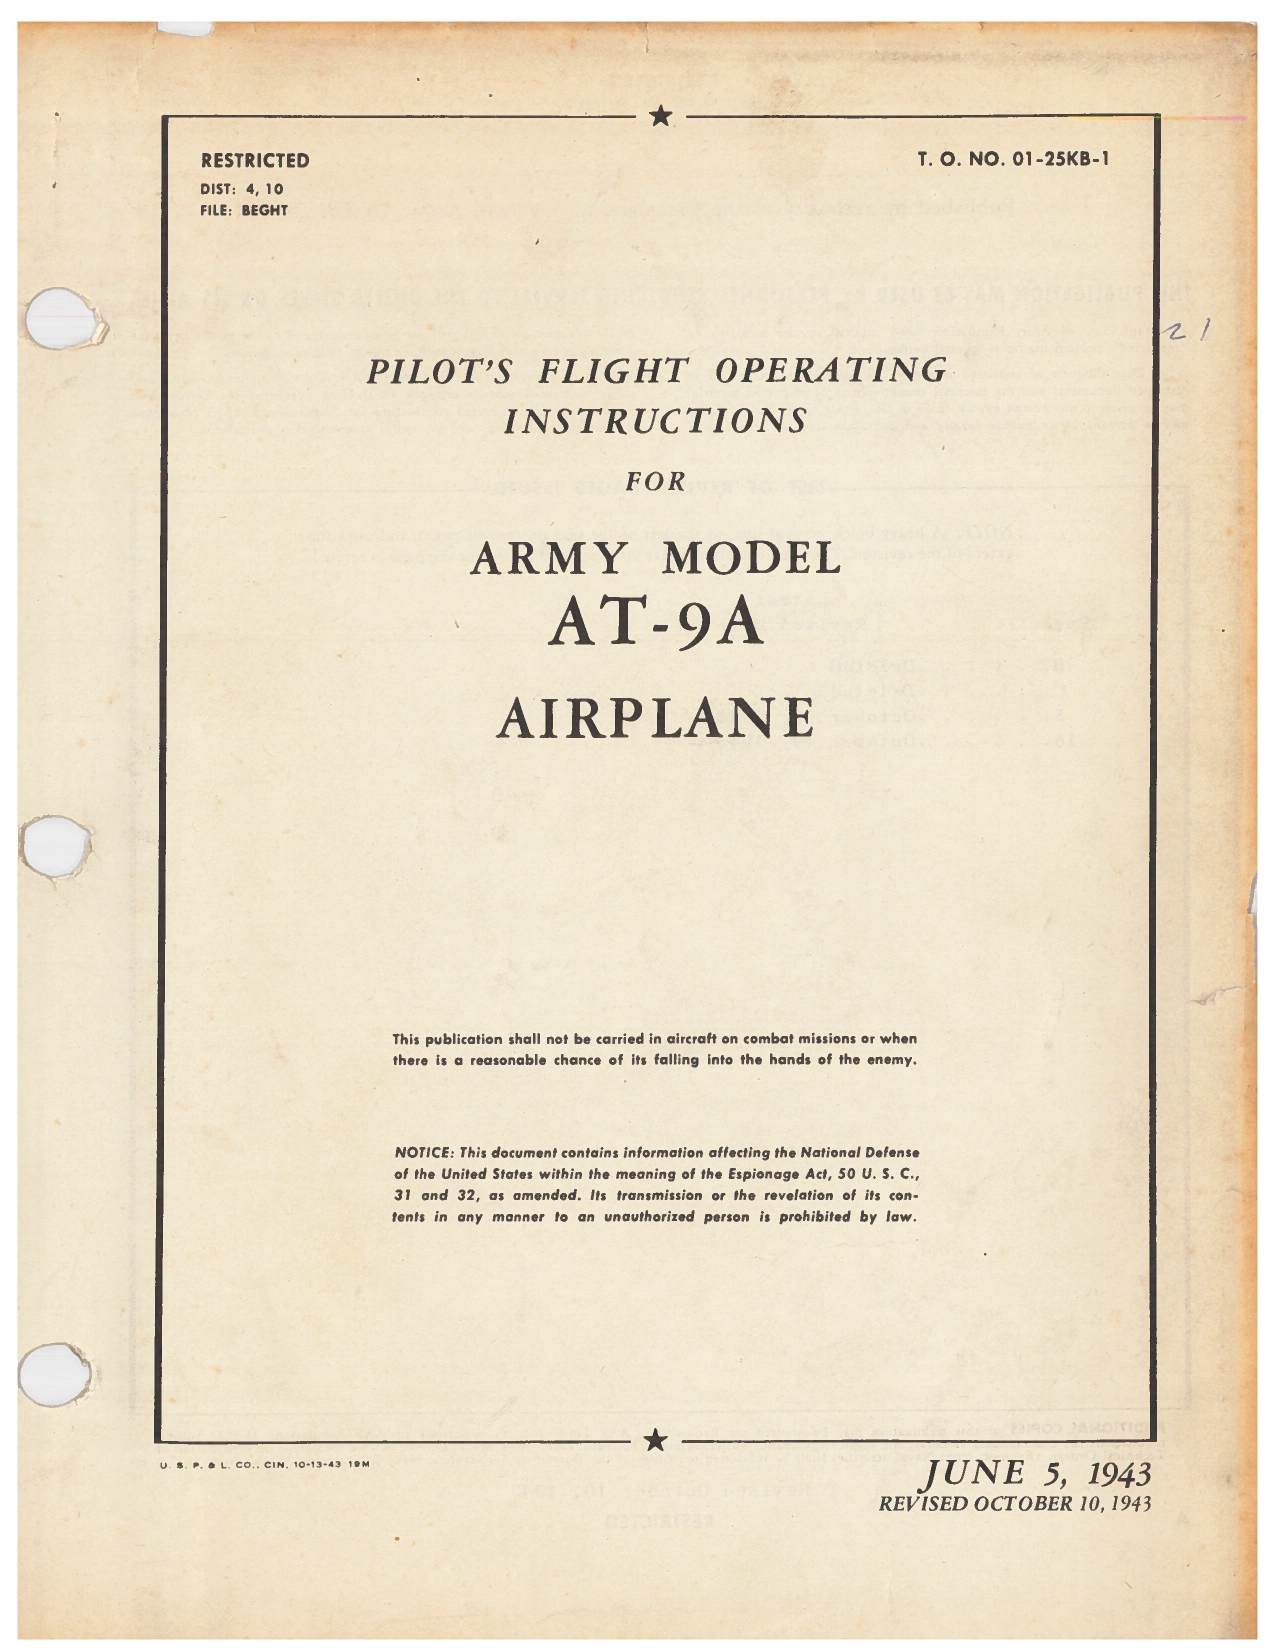 Sample page 1 from AirCorps Library document: Pilot's Flight Operating Instructions for Army Model AT-9A Airplane